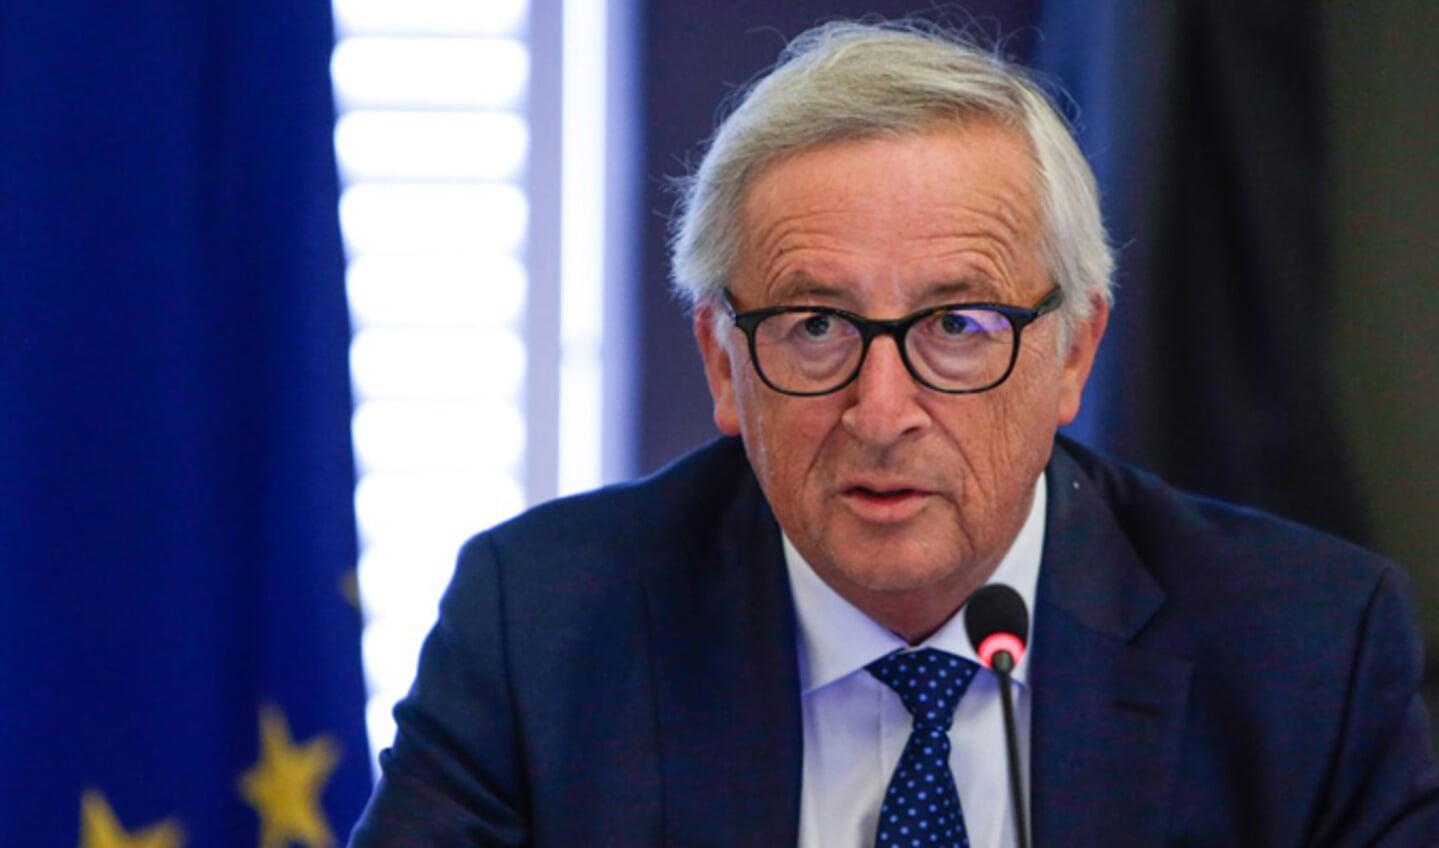 European Commission President Jean-Claude Juncker addresses members of the European Commission at the beginning of the group's seminar at Genval Castle, Genval, Belgium, on August 30, 2018. (Photo by Aris Oikonomou / POOL / AFP)        (Photo credit should read ARIS OIKONOMOU/AFP/Getty Images)